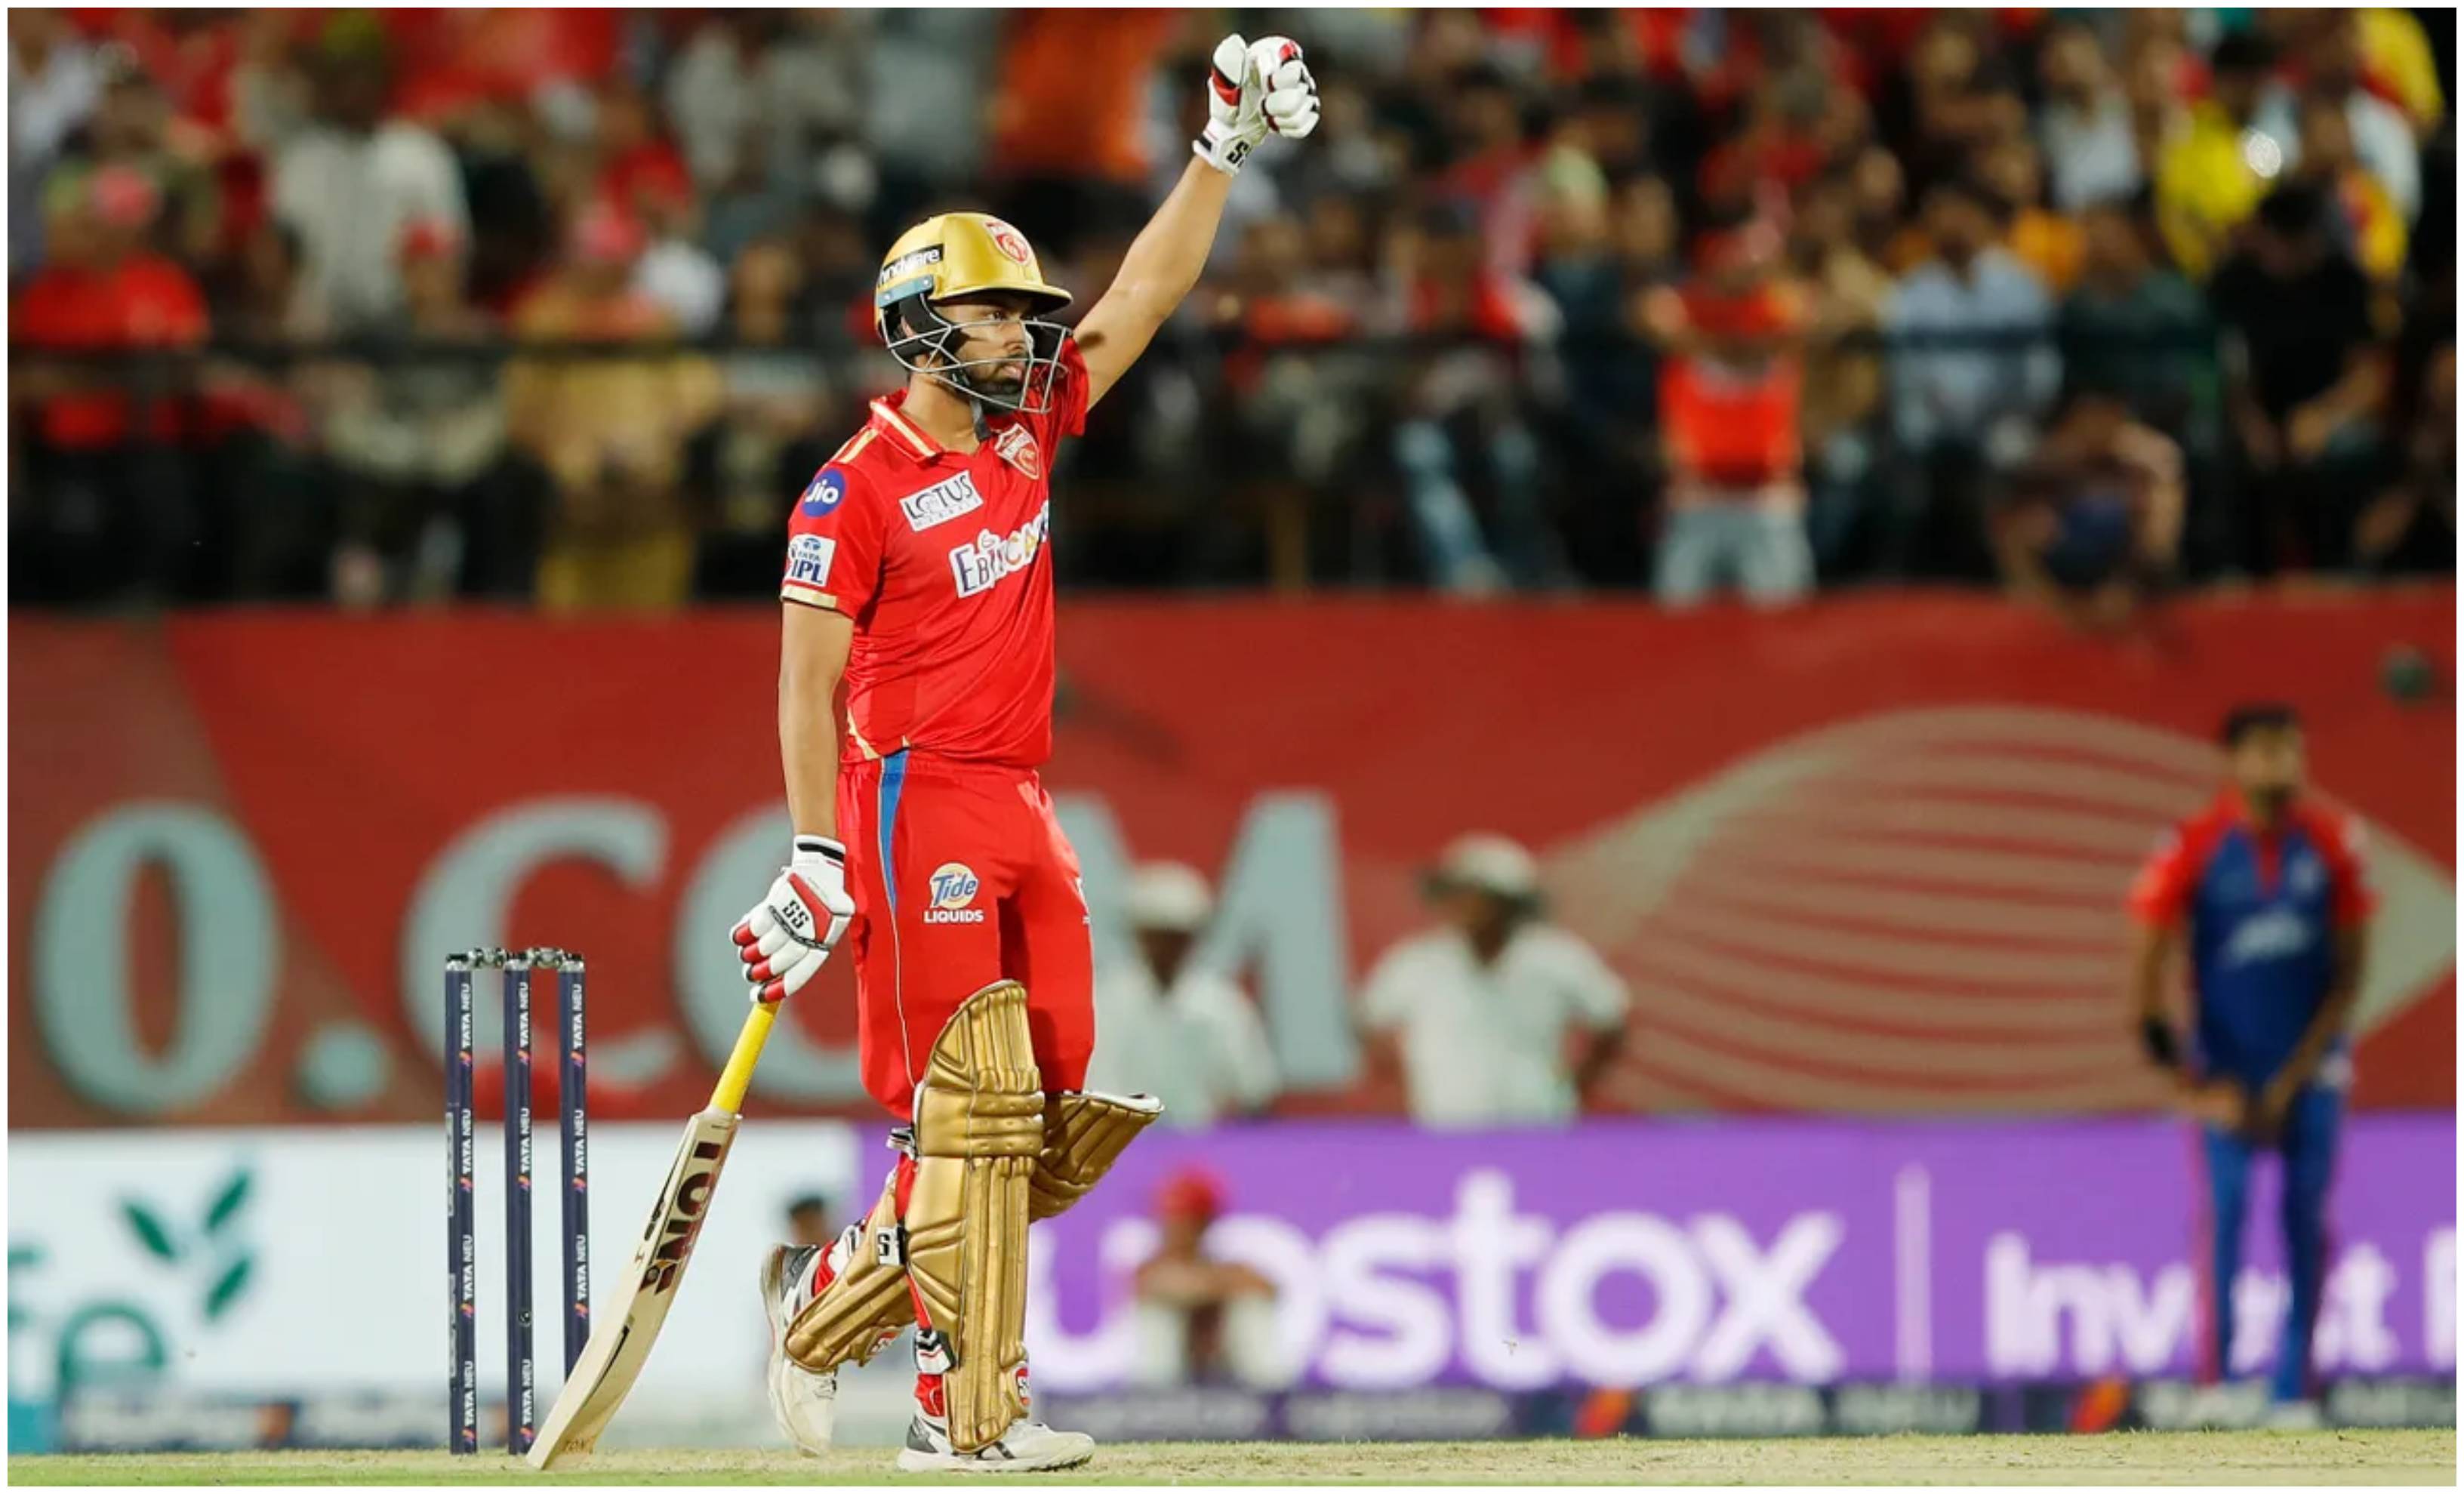 Punjab Kings retired out Atharva Taide | BCCI-IPL